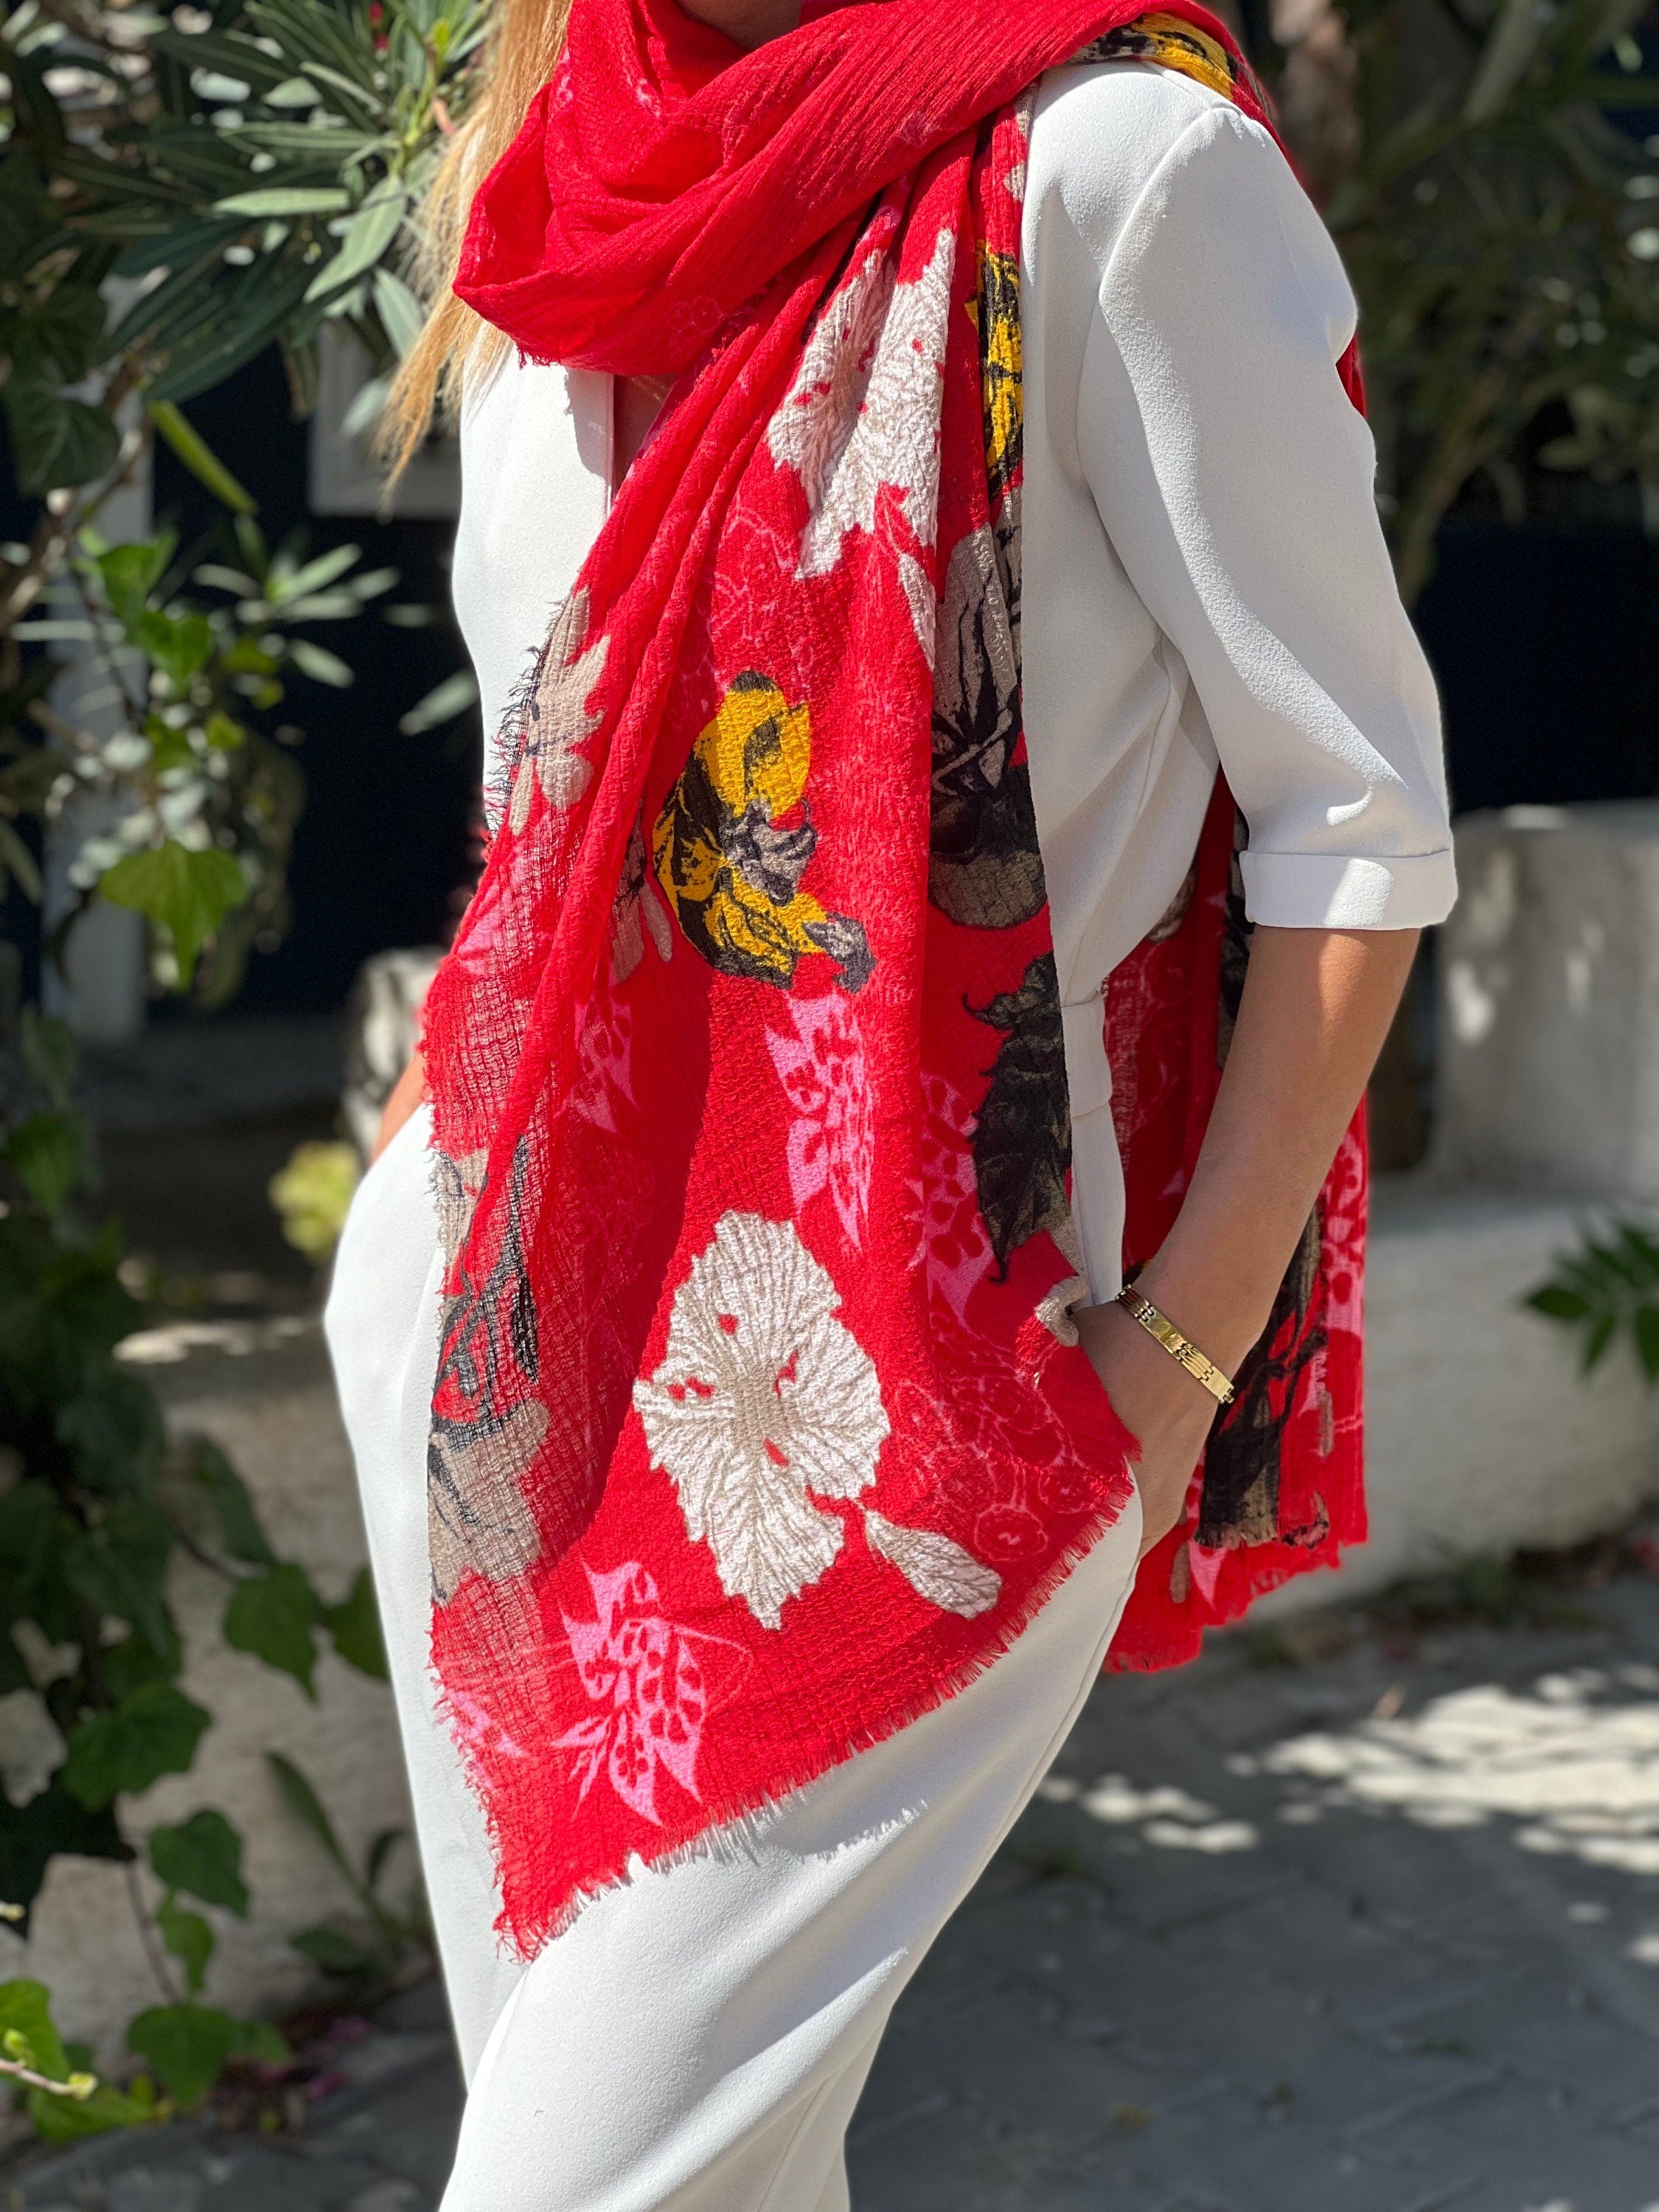 The floral design on this scarf is both classic and trendy, making it a versatile accessory for any wardrobe.